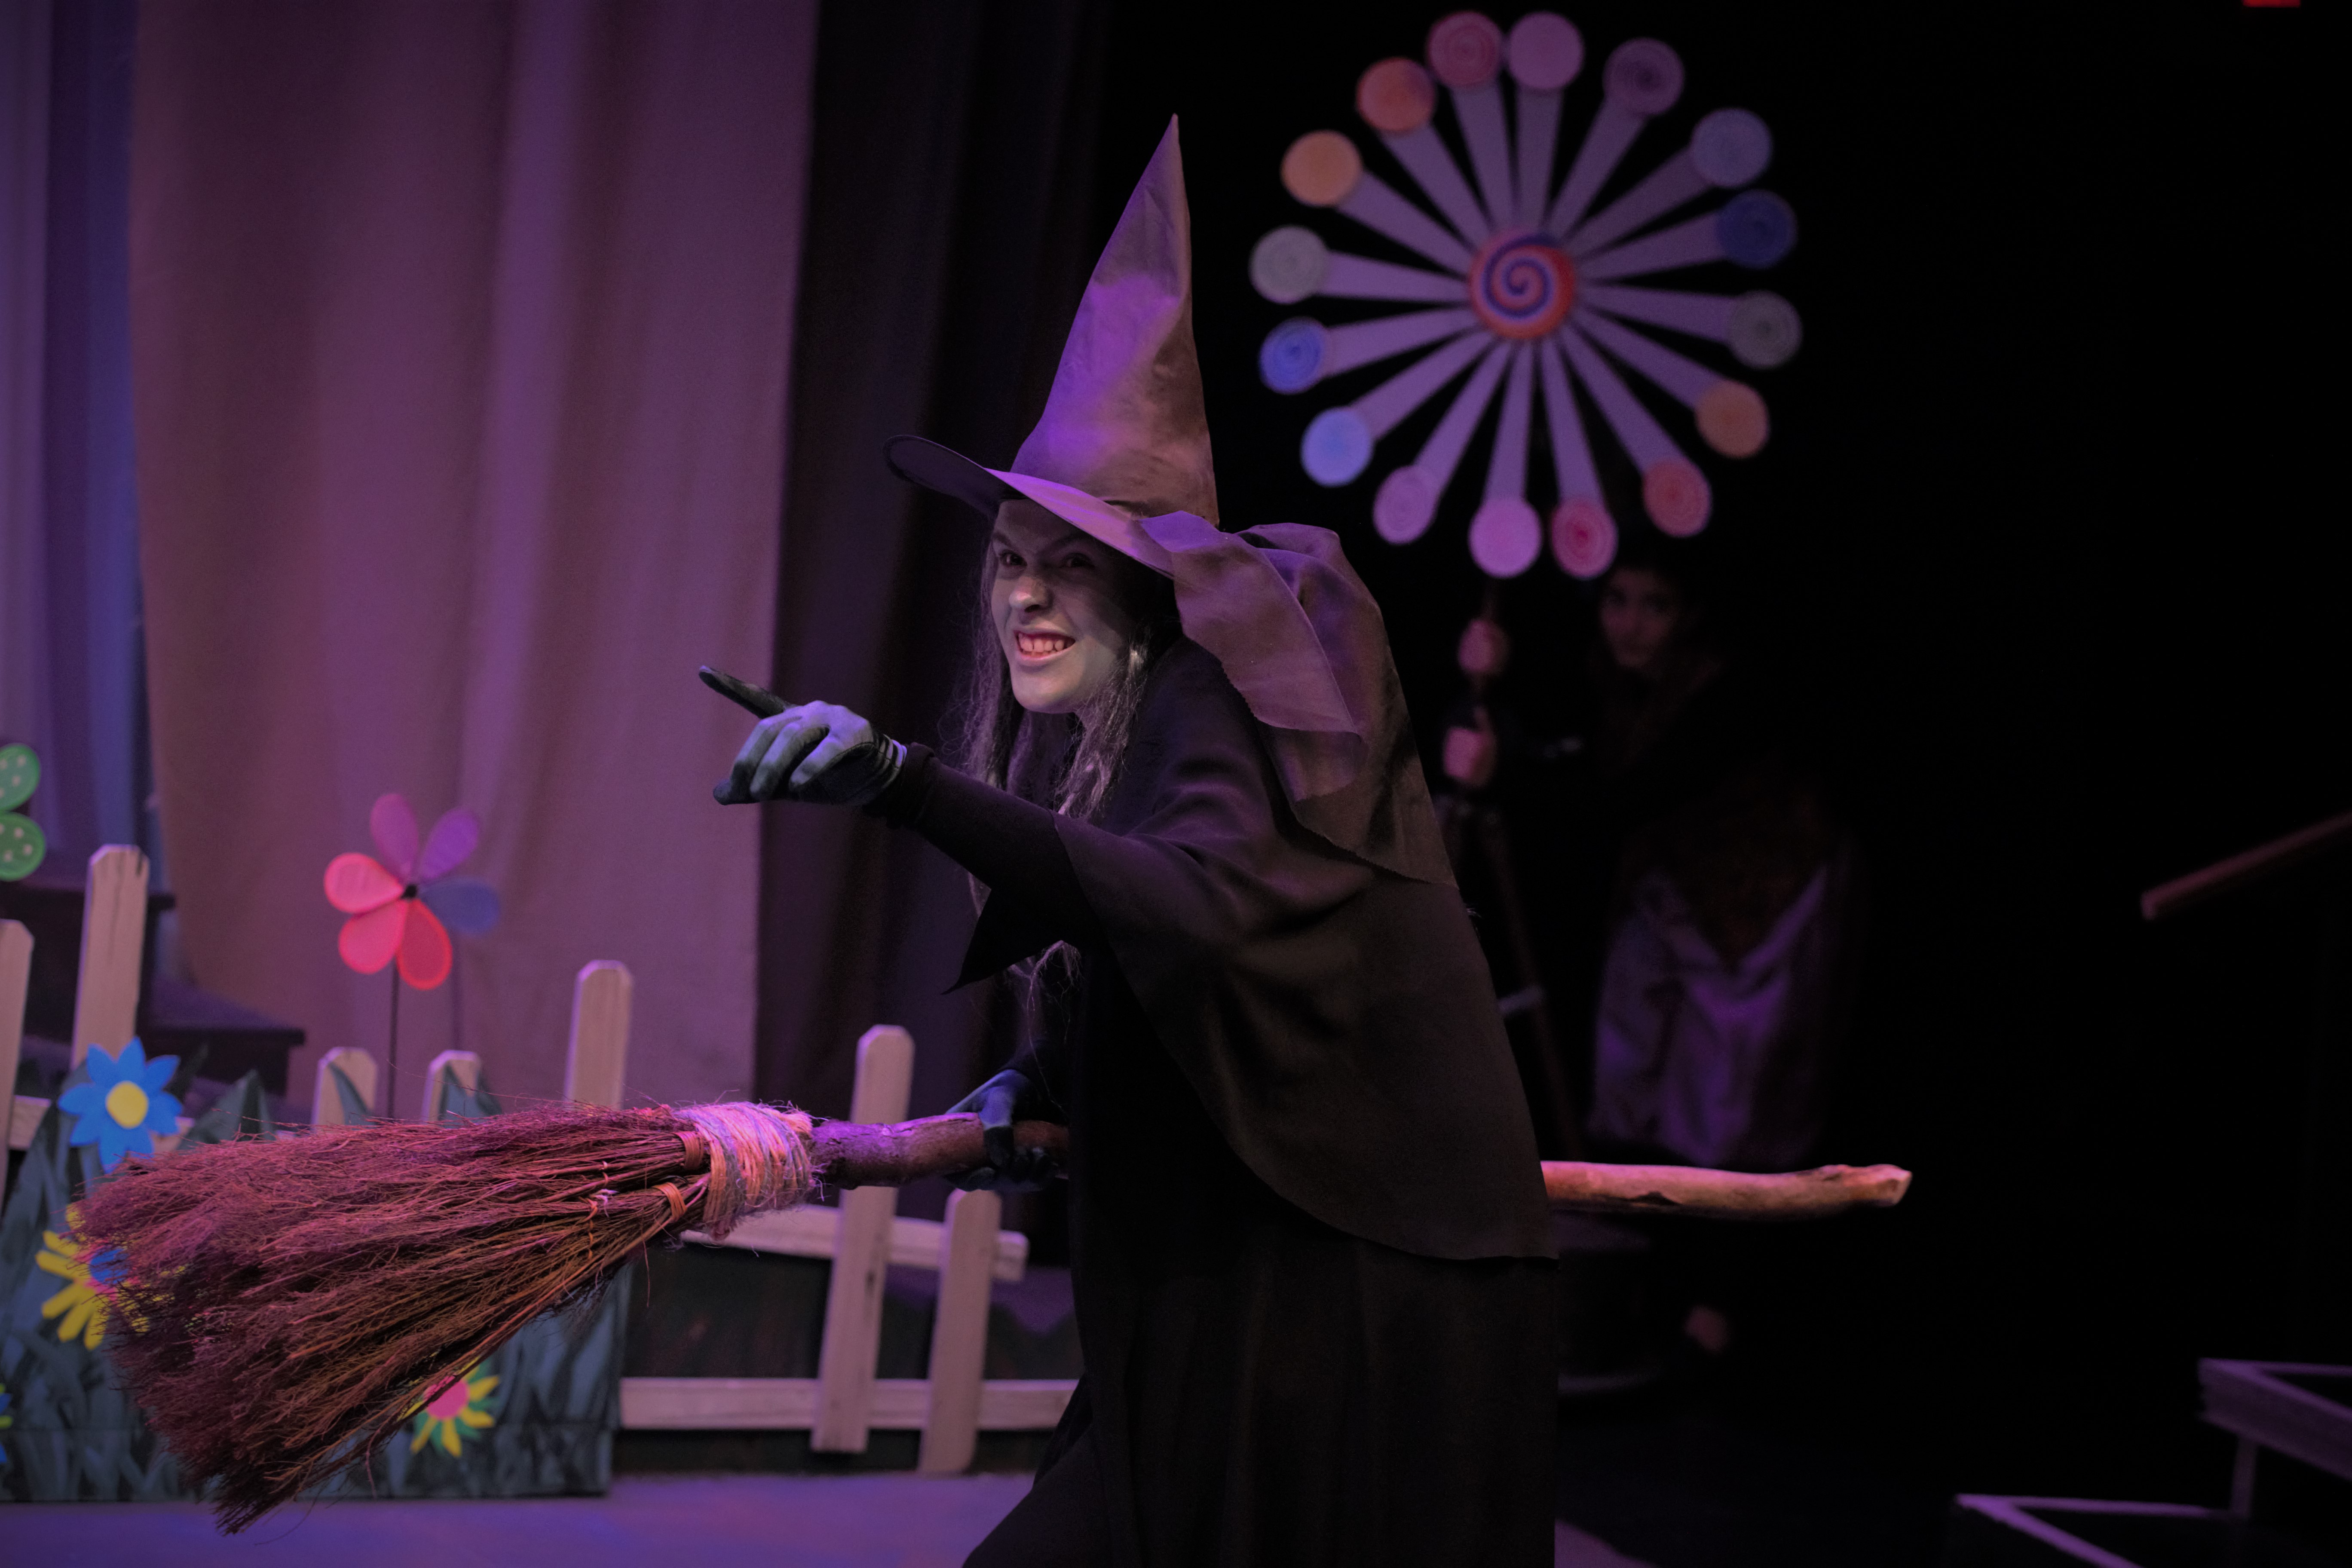 LNT student in performance of Wizard of Oz as the wicked witch of the west - green face, black dress, cape tall pointy hat, large broom in one hand - arm extended and pointing with other. 